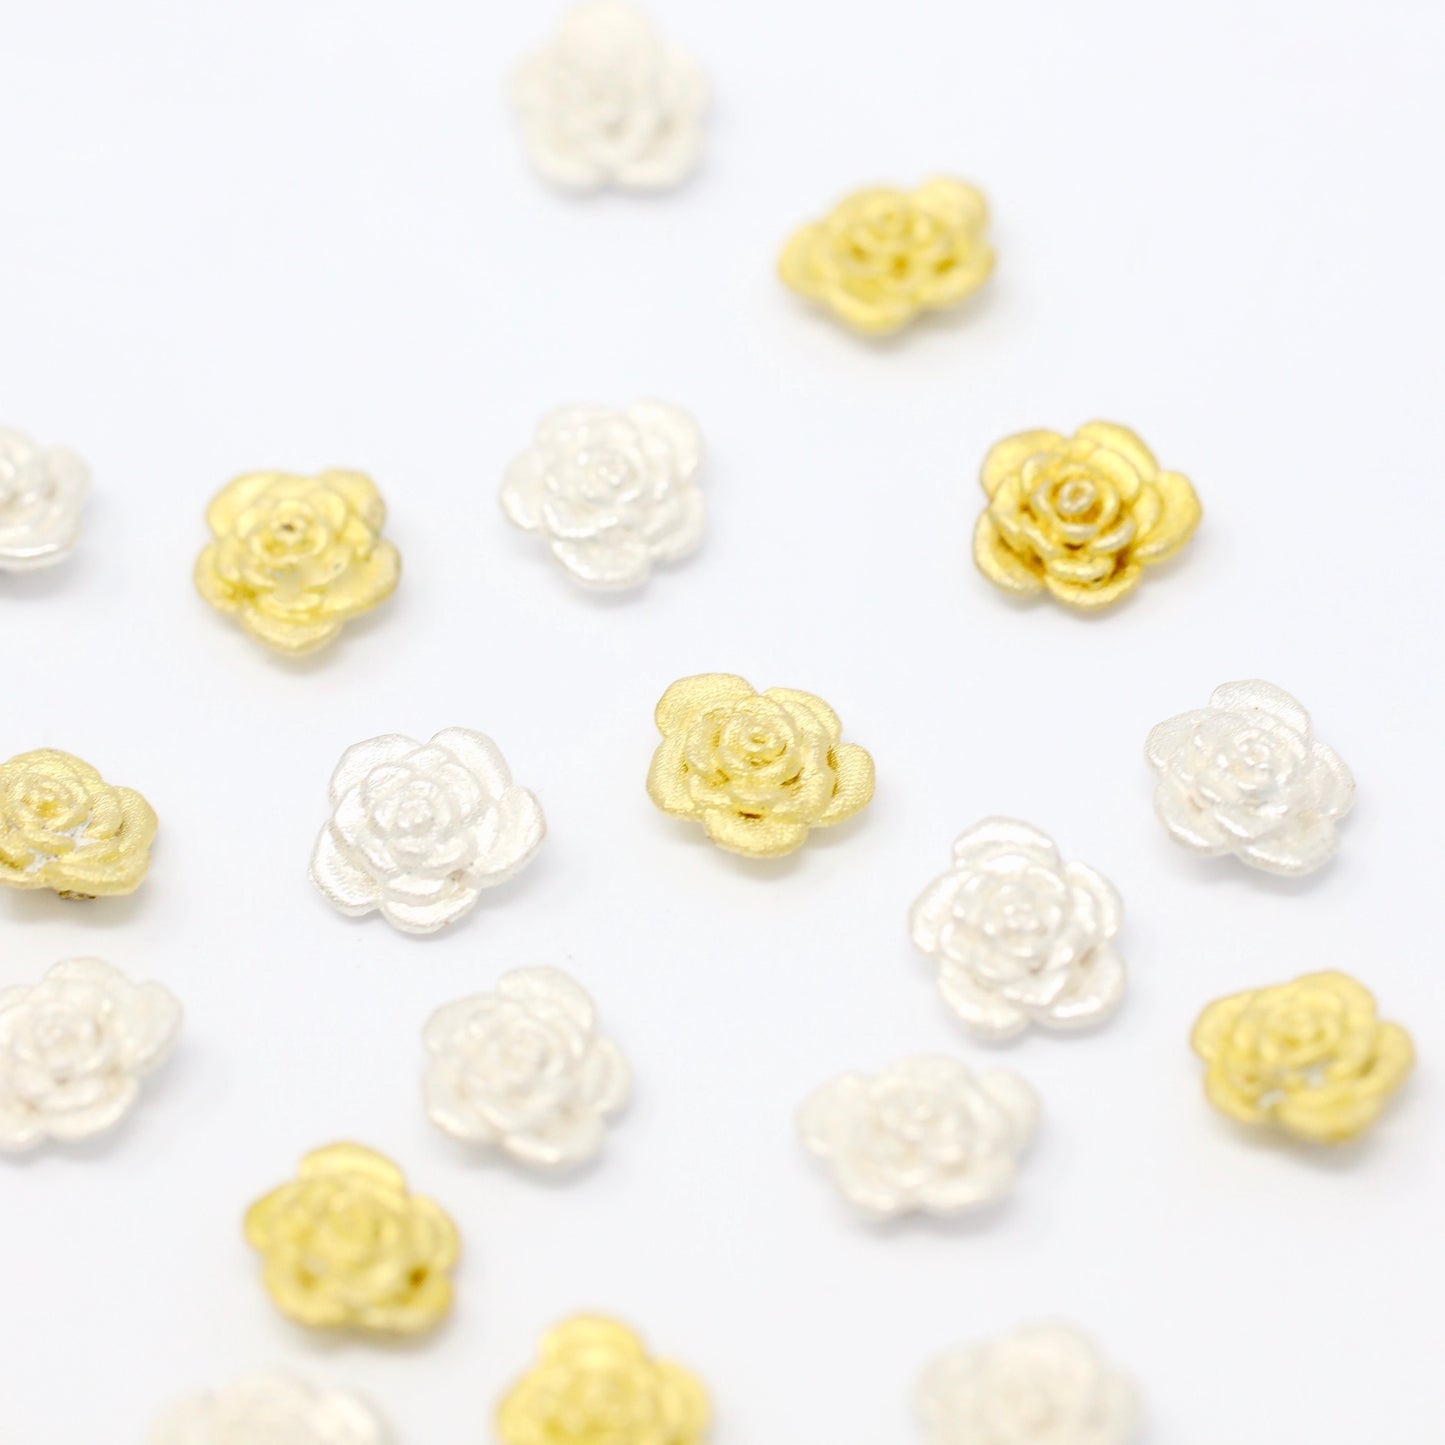 SALE Rose Accent Charm Embellishments for Soldering or Jewelry Making